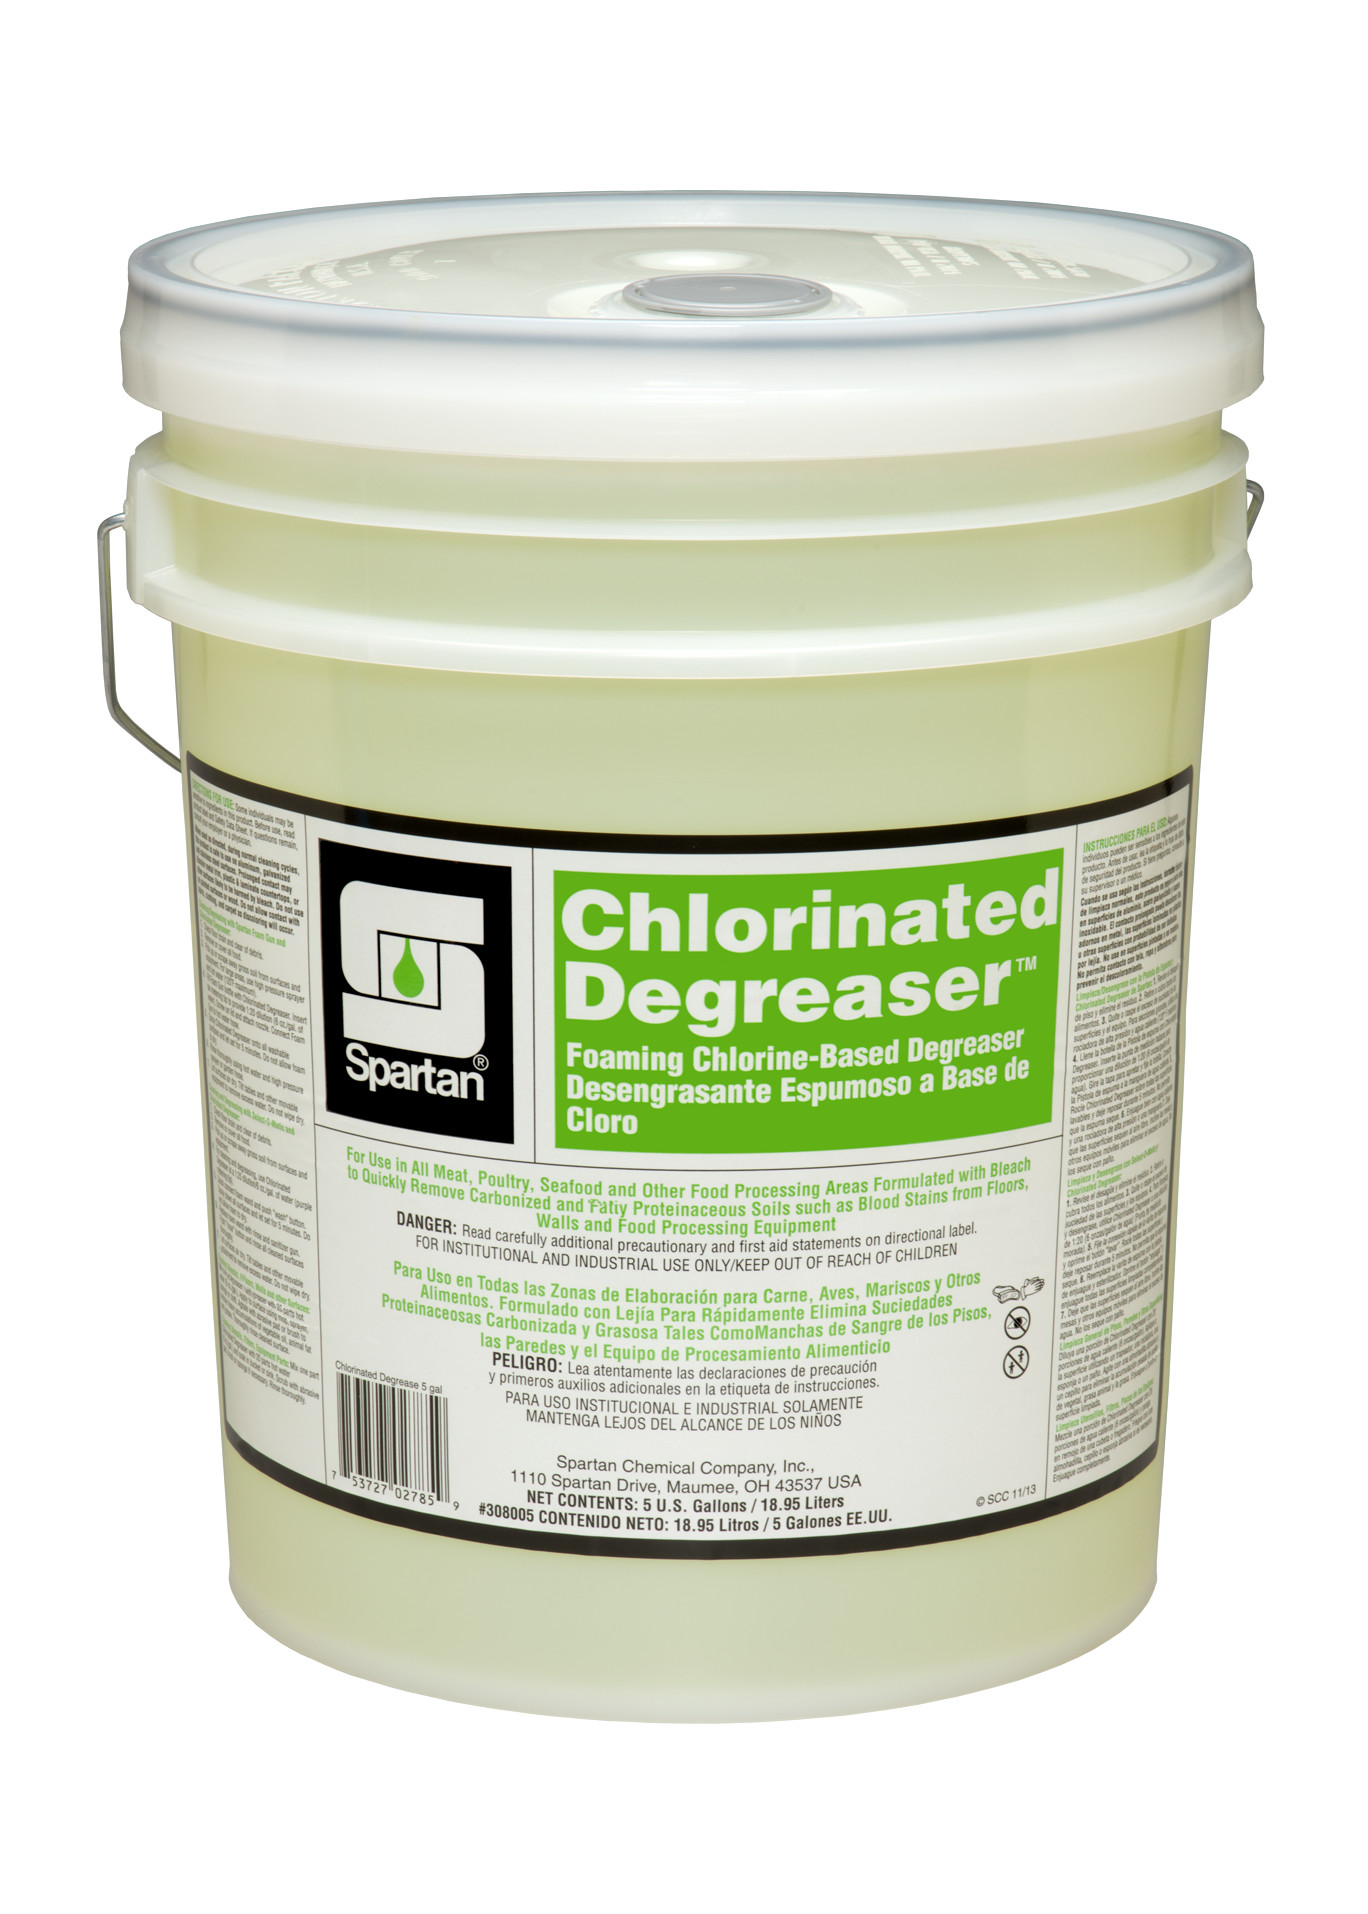 Spartan Chemical Company Chlorinated Degreaser, 5 GAL PAIL